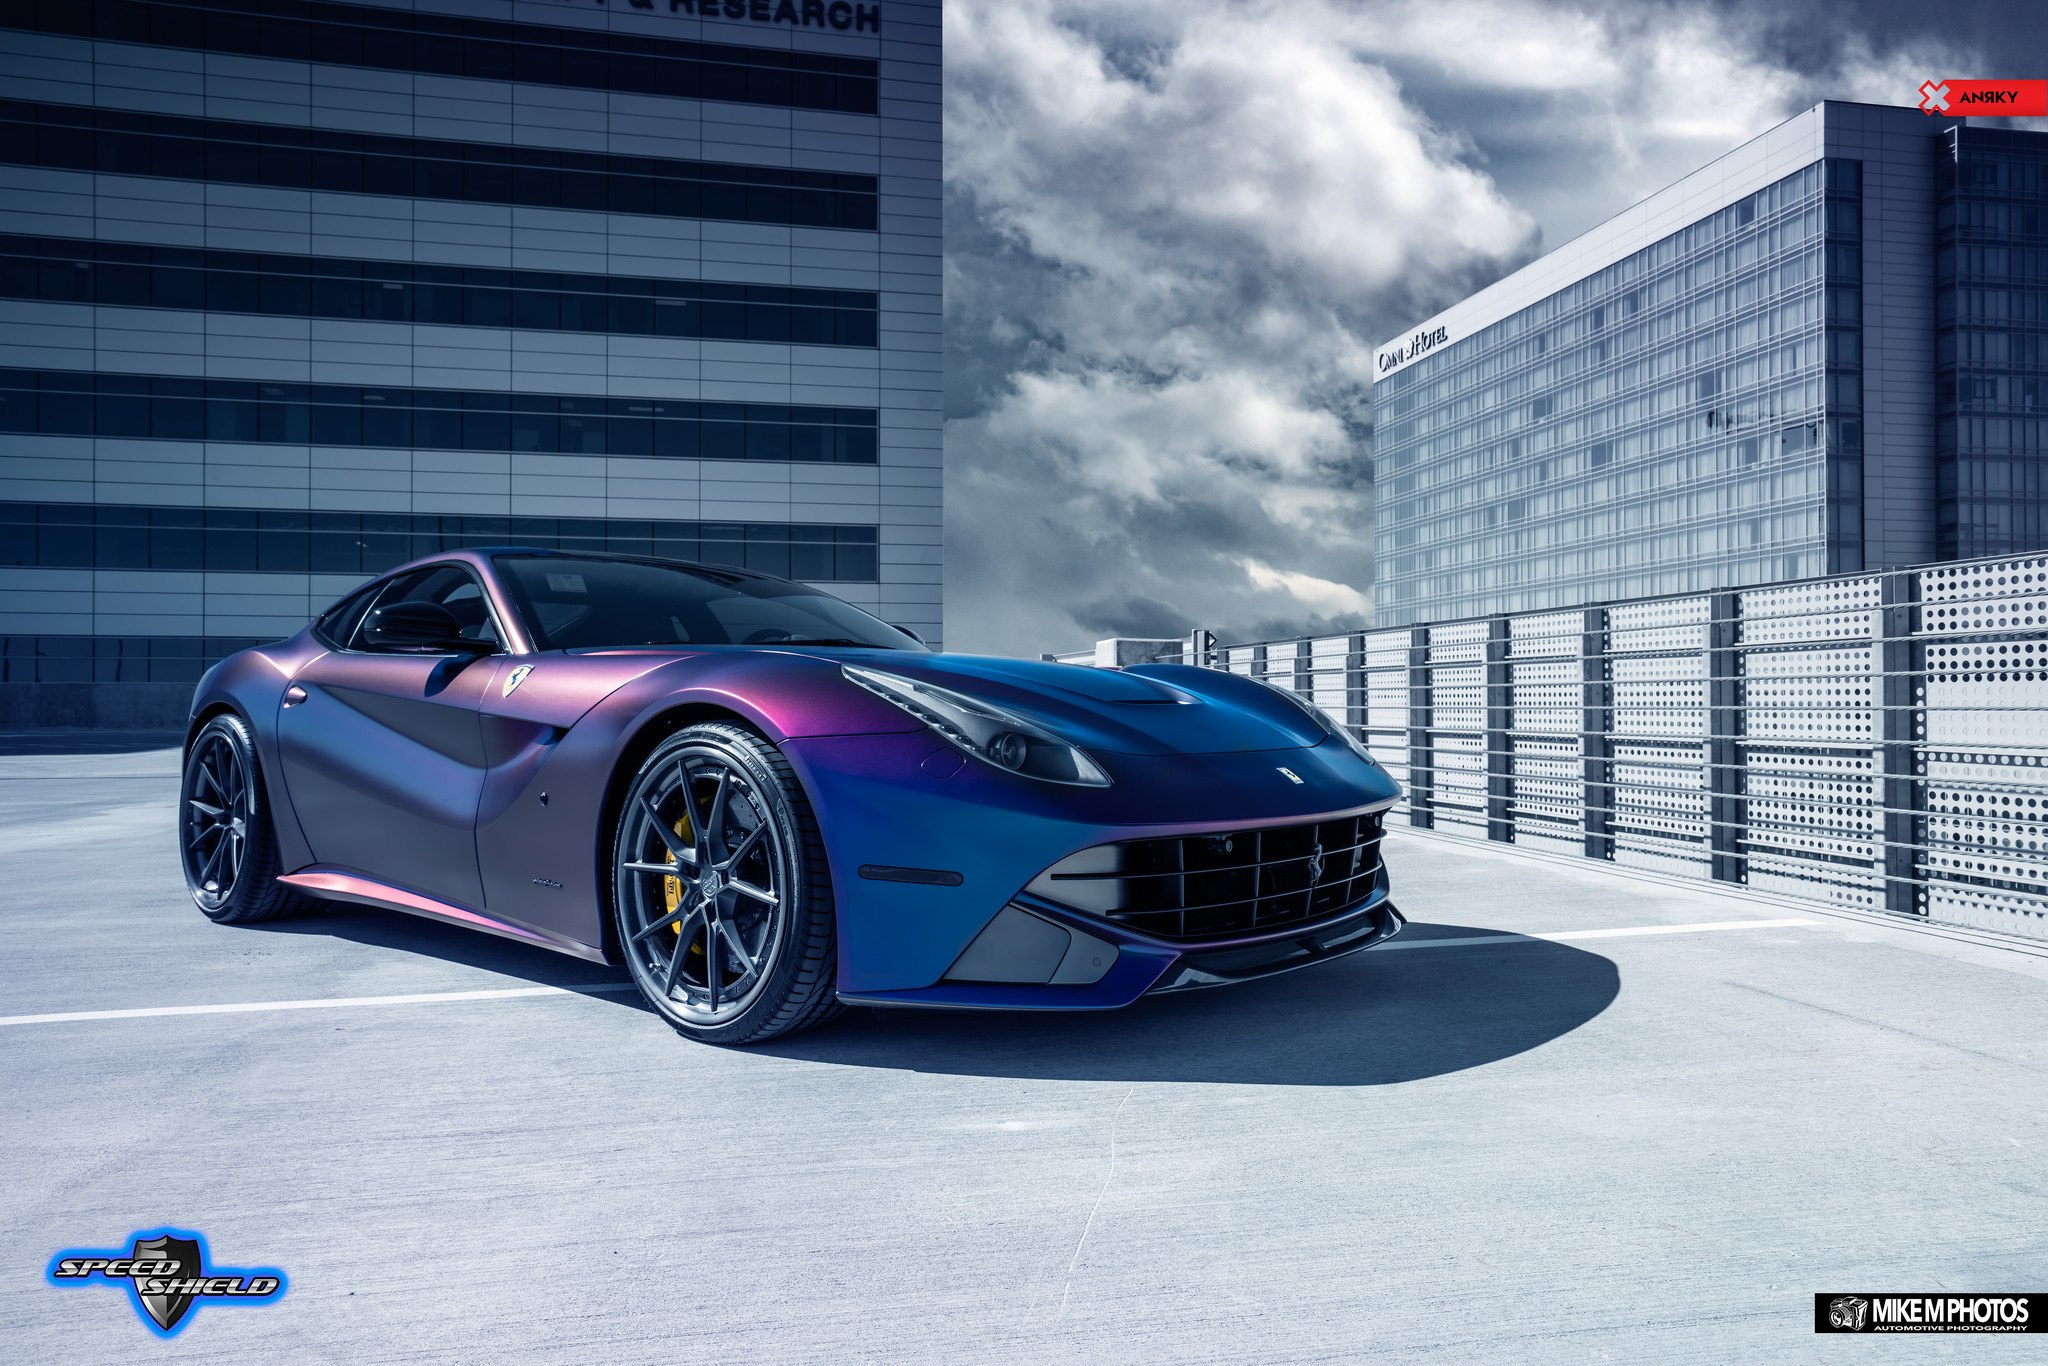 Chameleon Ferrari F12 with Aftermarket Front Bumper - Photo by ANRKY Wheels